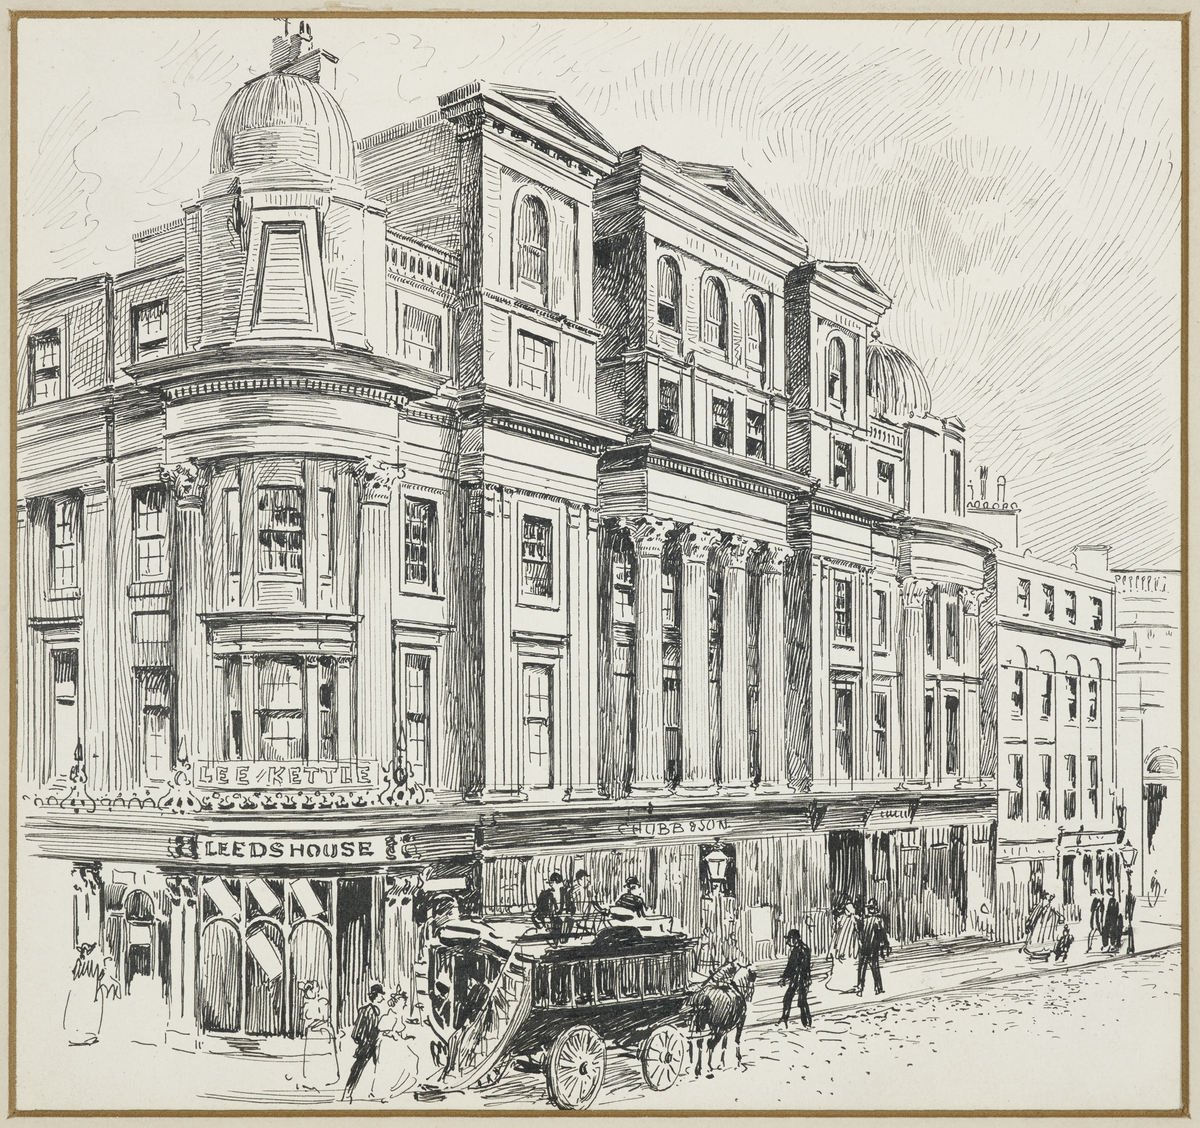 Newall's Buildings, Market Street, Site of the present Royal Exchange